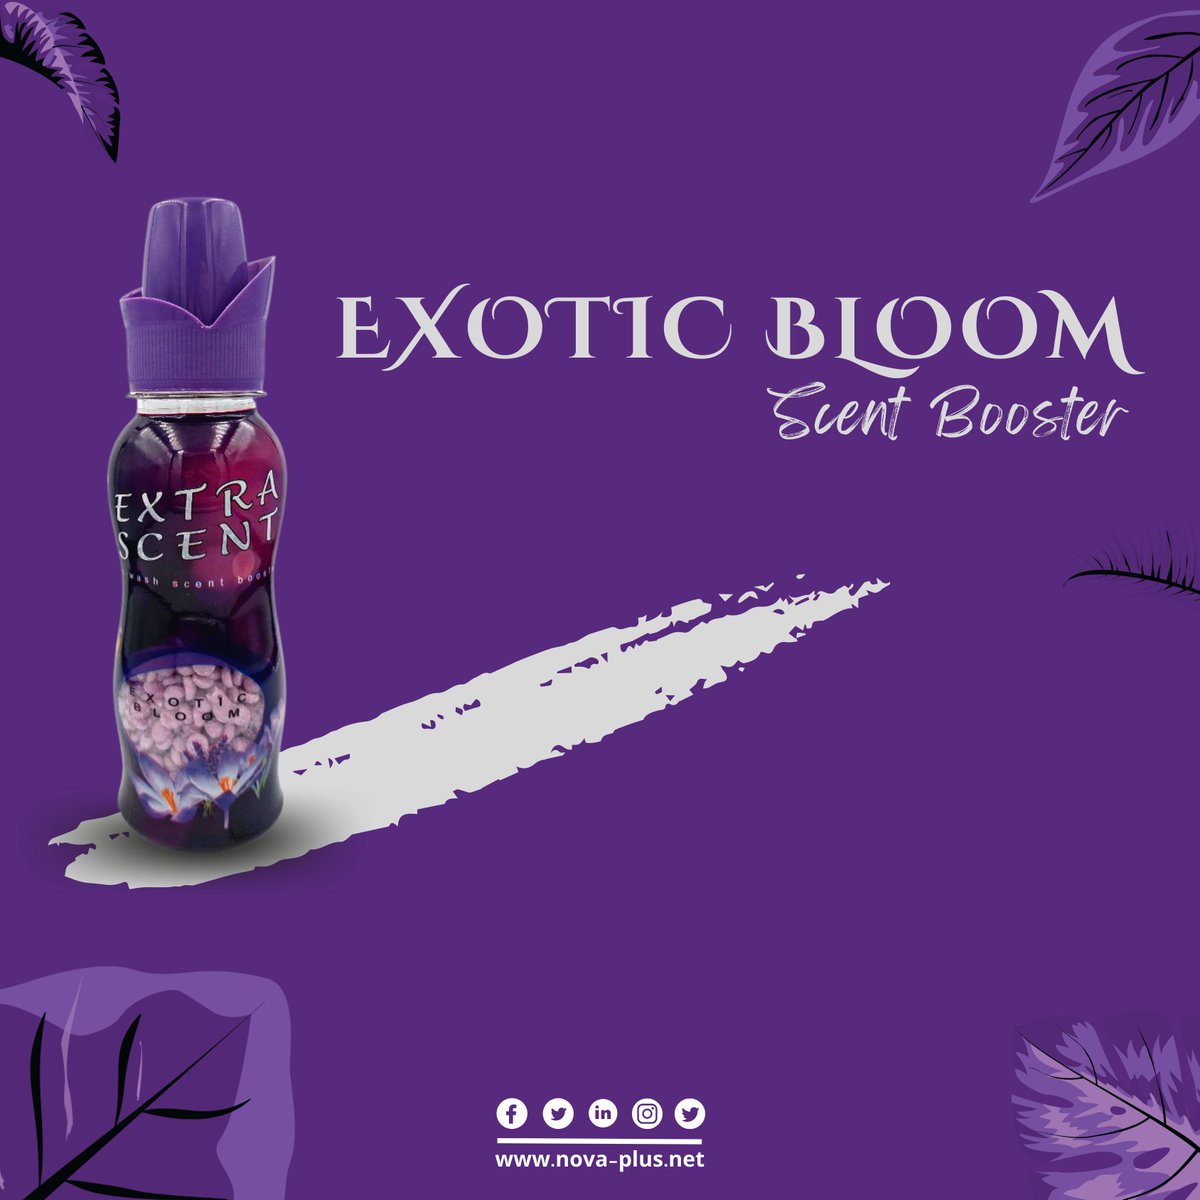 Nova Plus International Trading

Product: Extra Scent Exotic Bloom

Extra Scent in-wash scent booster: More of the scent you love

 #scentbooster #scentboosters #scentboosterbeads #scent #scentoftheday #laundry #laundryroom #laundrydetergent #turkey #saudiarabia